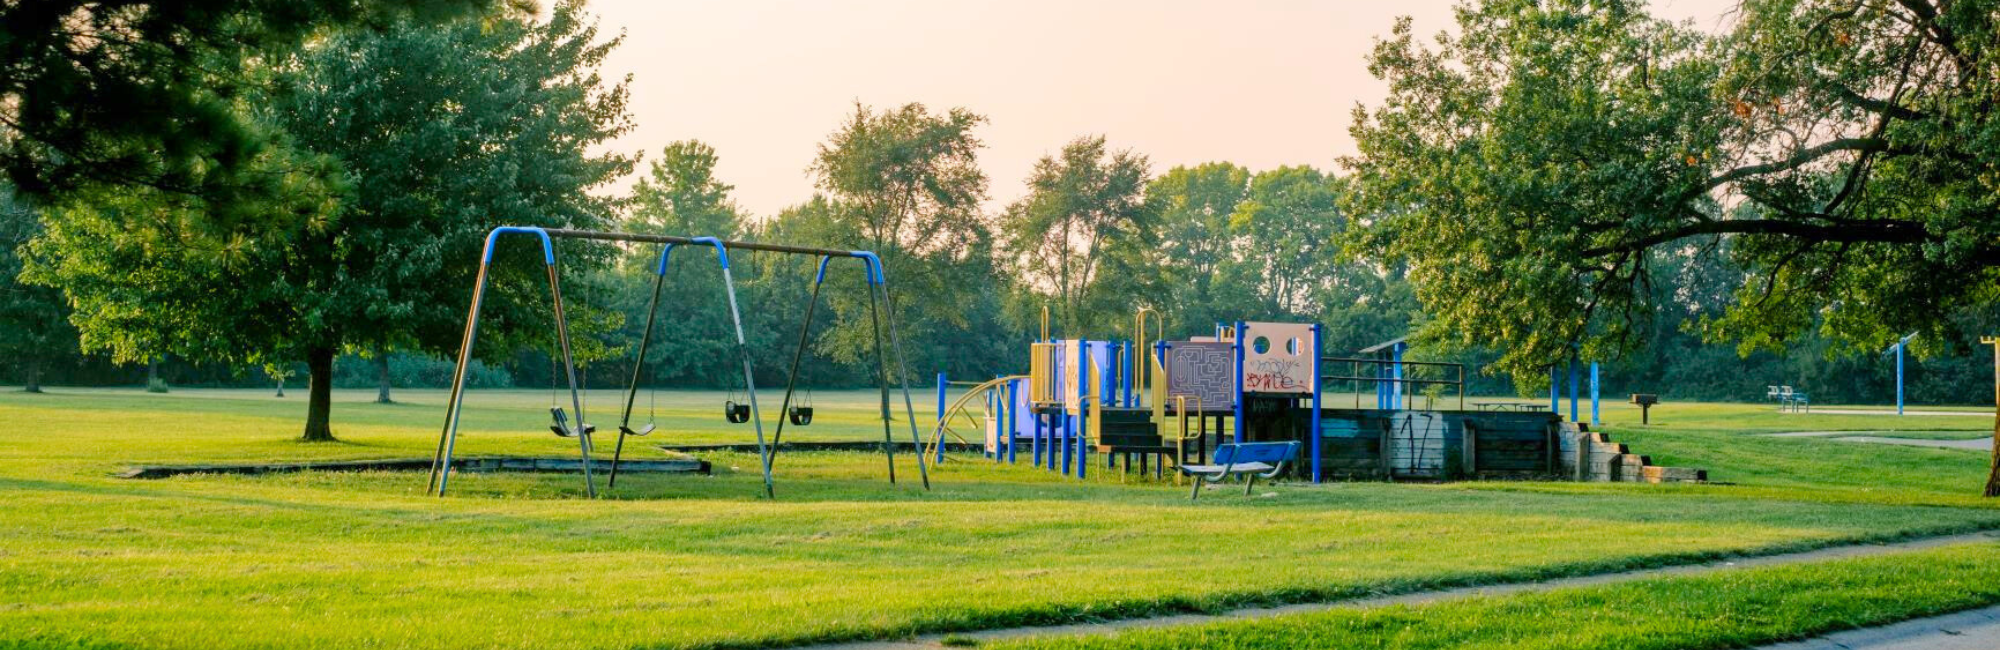 park with a playground and swingset in the distance